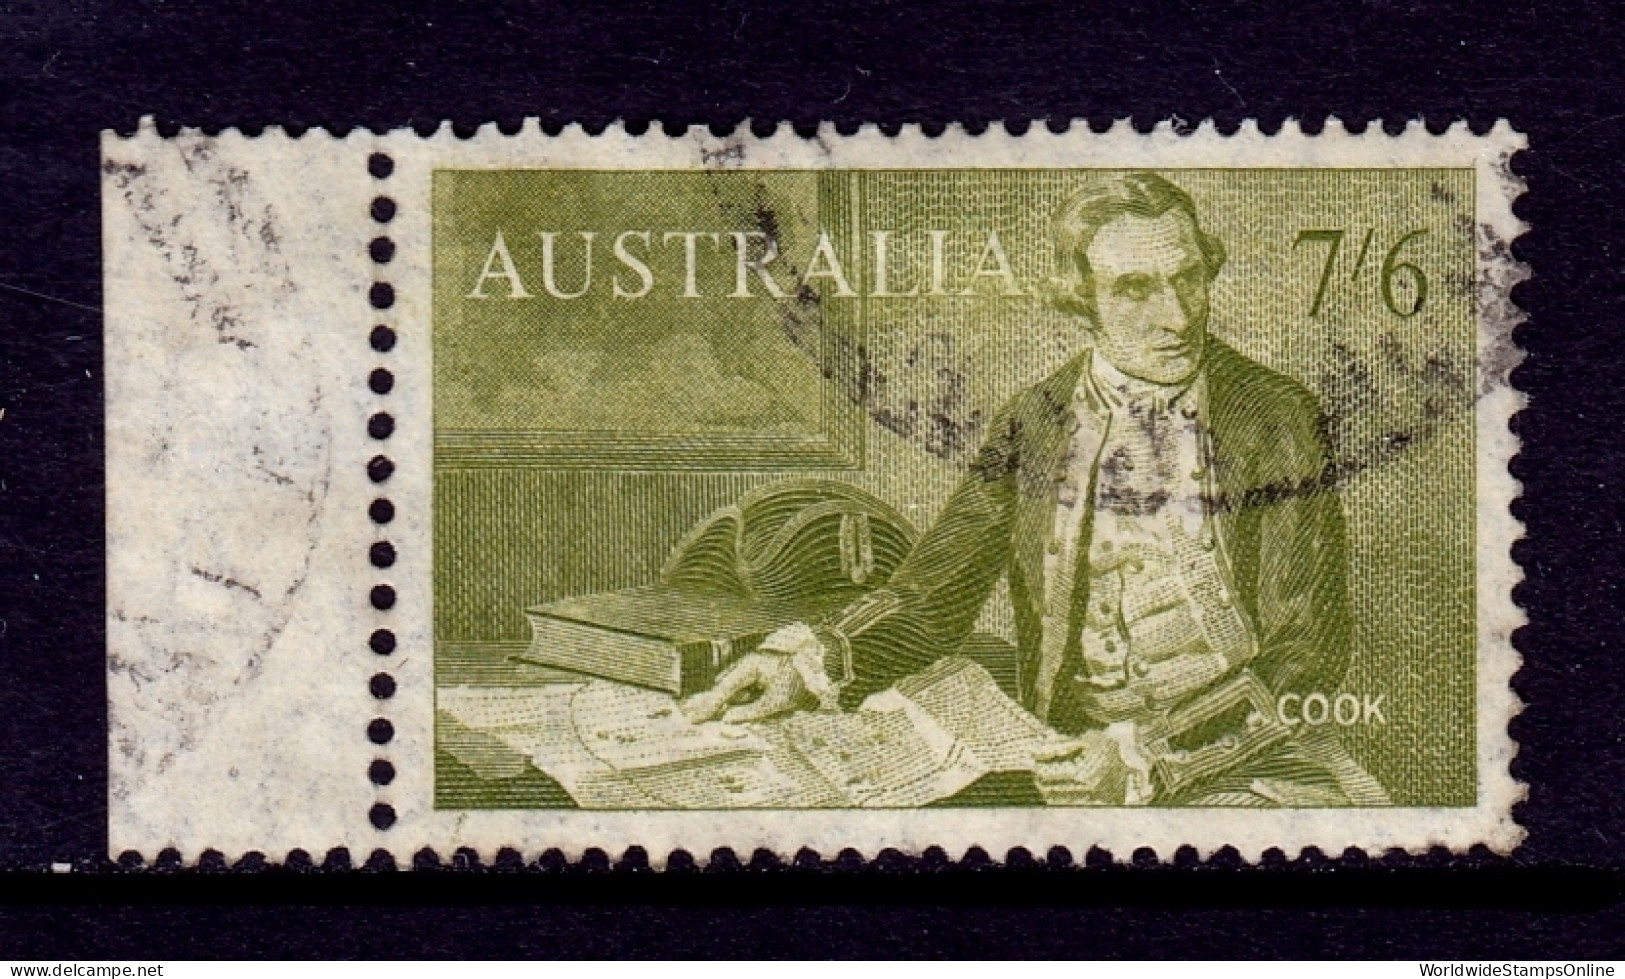 Australia - Scott #376 - Used - Remnant Gum, Unevenness - SCV $16 - Used Stamps